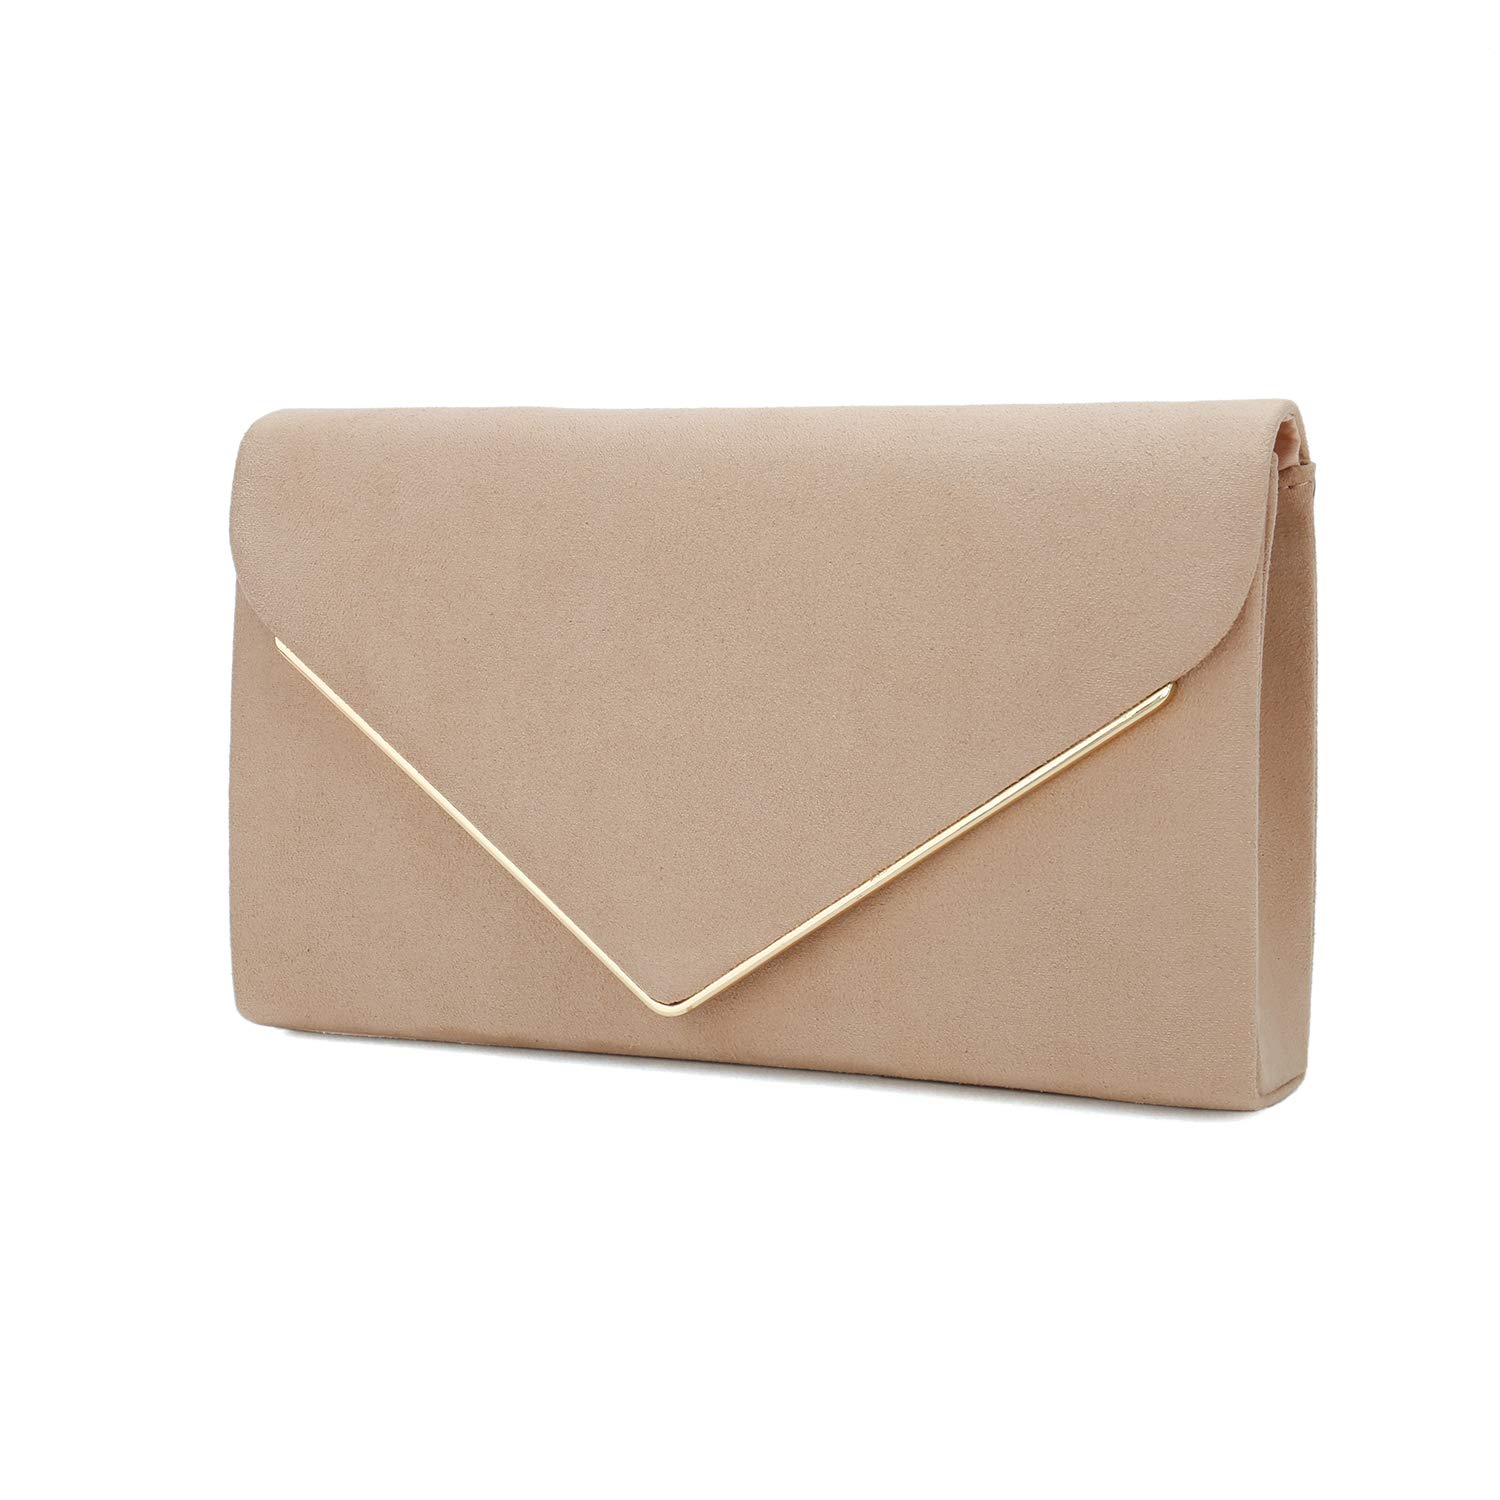 CHARMING TAILOR Faux Suede Clutch Bag Elegant Metal Binding Evening Purse for Wedding/Prom/Black-Tie Events